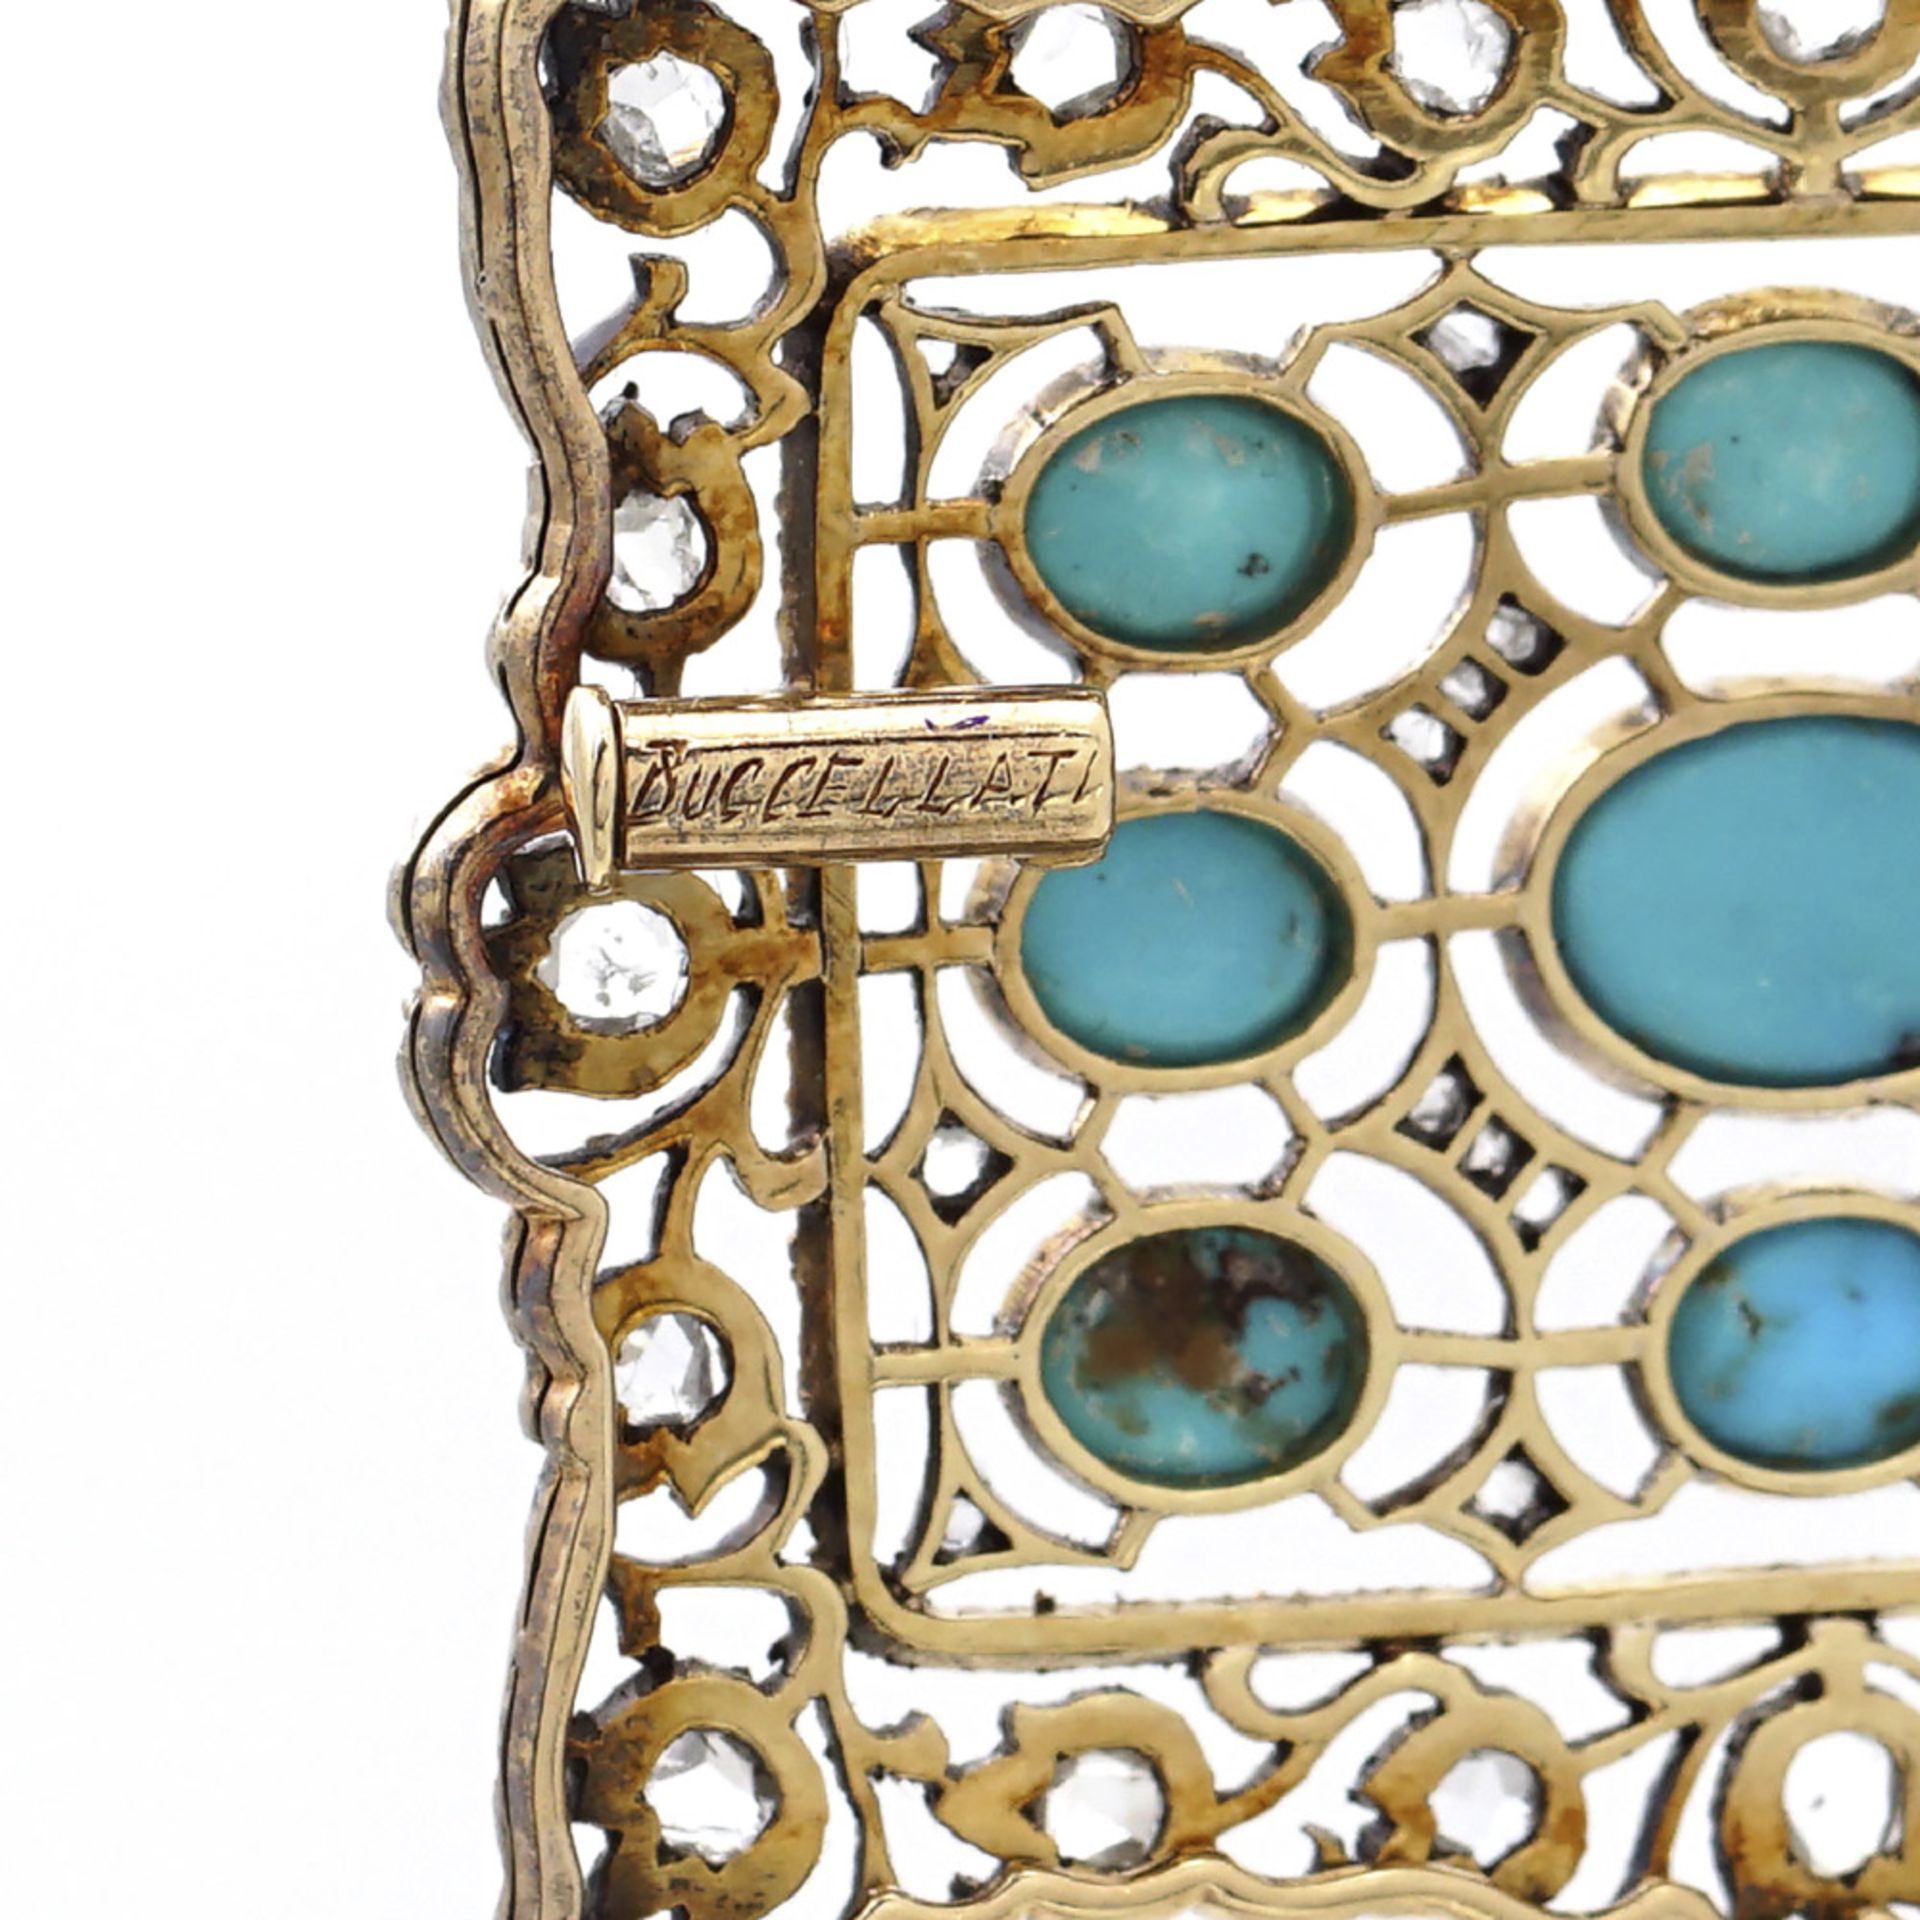 Buccellati, yellow gold and silver brooch early 20th century weight 7,4gr - Image 2 of 2